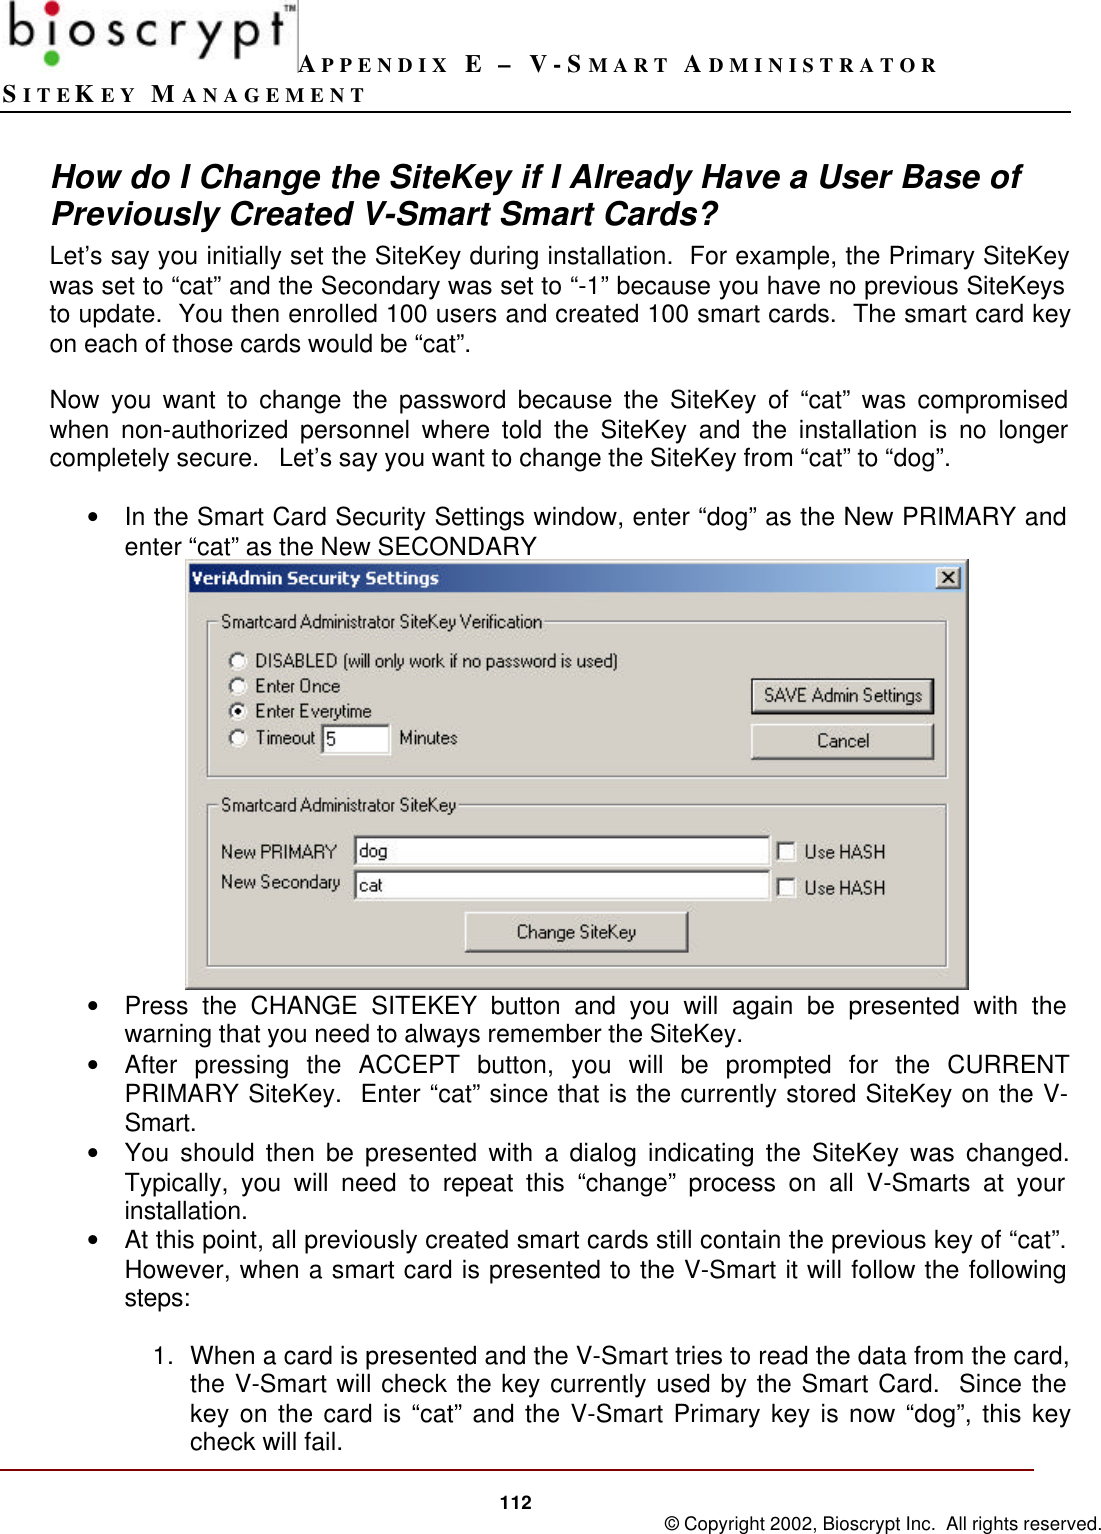 APPENDIX E – V-SMART ADMINISTRATORSITEKEY MANAGEMENT112 © Copyright 2002, Bioscrypt Inc.  All rights reserved.How do I Change the SiteKey if I Already Have a User Base ofPreviously Created V-Smart Smart Cards?Let’s say you initially set the SiteKey during installation.  For example, the Primary SiteKeywas set to “cat” and the Secondary was set to “-1” because you have no previous SiteKeysto update.  You then enrolled 100 users and created 100 smart cards.  The smart card keyon each of those cards would be “cat”.Now you want to change the password because the SiteKey of “cat” was compromisedwhen non-authorized personnel where told the SiteKey and the installation is no longercompletely secure.   Let’s say you want to change the SiteKey from “cat” to “dog”.• In the Smart Card Security Settings window, enter “dog” as the New PRIMARY andenter “cat” as the New SECONDARY• Press the CHANGE SITEKEY button and you will again be presented with thewarning that you need to always remember the SiteKey.• After pressing the ACCEPT button, you will be prompted for the CURRENTPRIMARY SiteKey.  Enter “cat” since that is the currently stored SiteKey on the V-Smart.• You should then be presented with a dialog indicating the SiteKey was changed.Typically, you will need to repeat this “change” process on all V-Smarts at yourinstallation.• At this point, all previously created smart cards still contain the previous key of “cat”.However, when a smart card is presented to the V-Smart it will follow the followingsteps:1. When a card is presented and the V-Smart tries to read the data from the card,the V-Smart will check the key currently used by the Smart Card.  Since thekey on the card is “cat” and the V-Smart Primary key is now “dog”, this keycheck will fail.